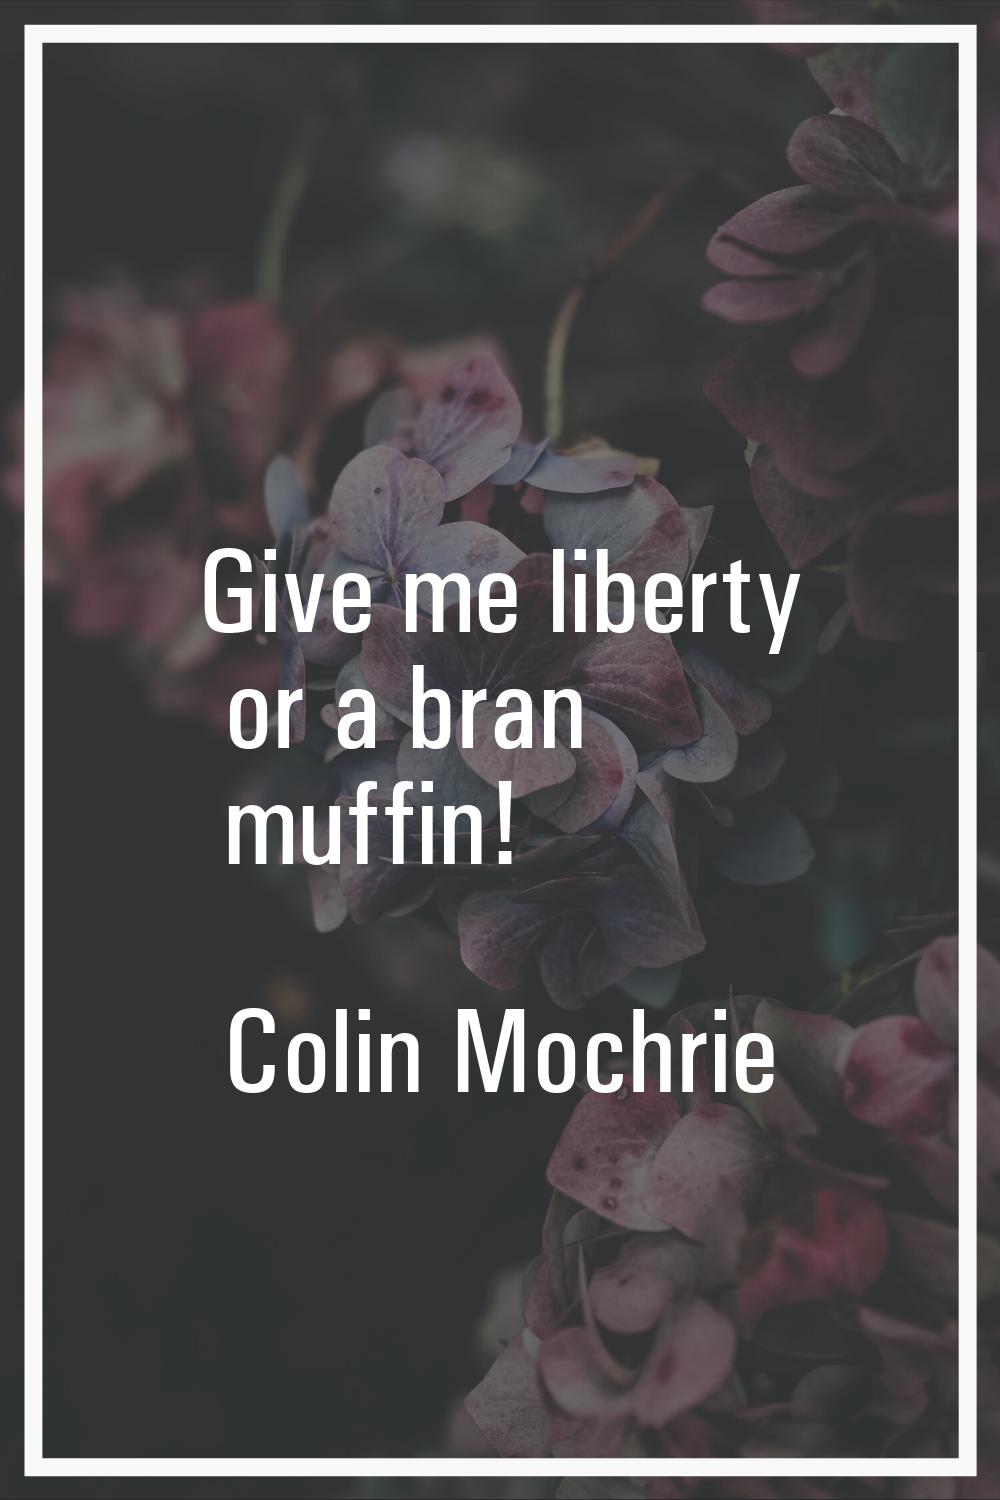 Give me liberty or a bran muffin!